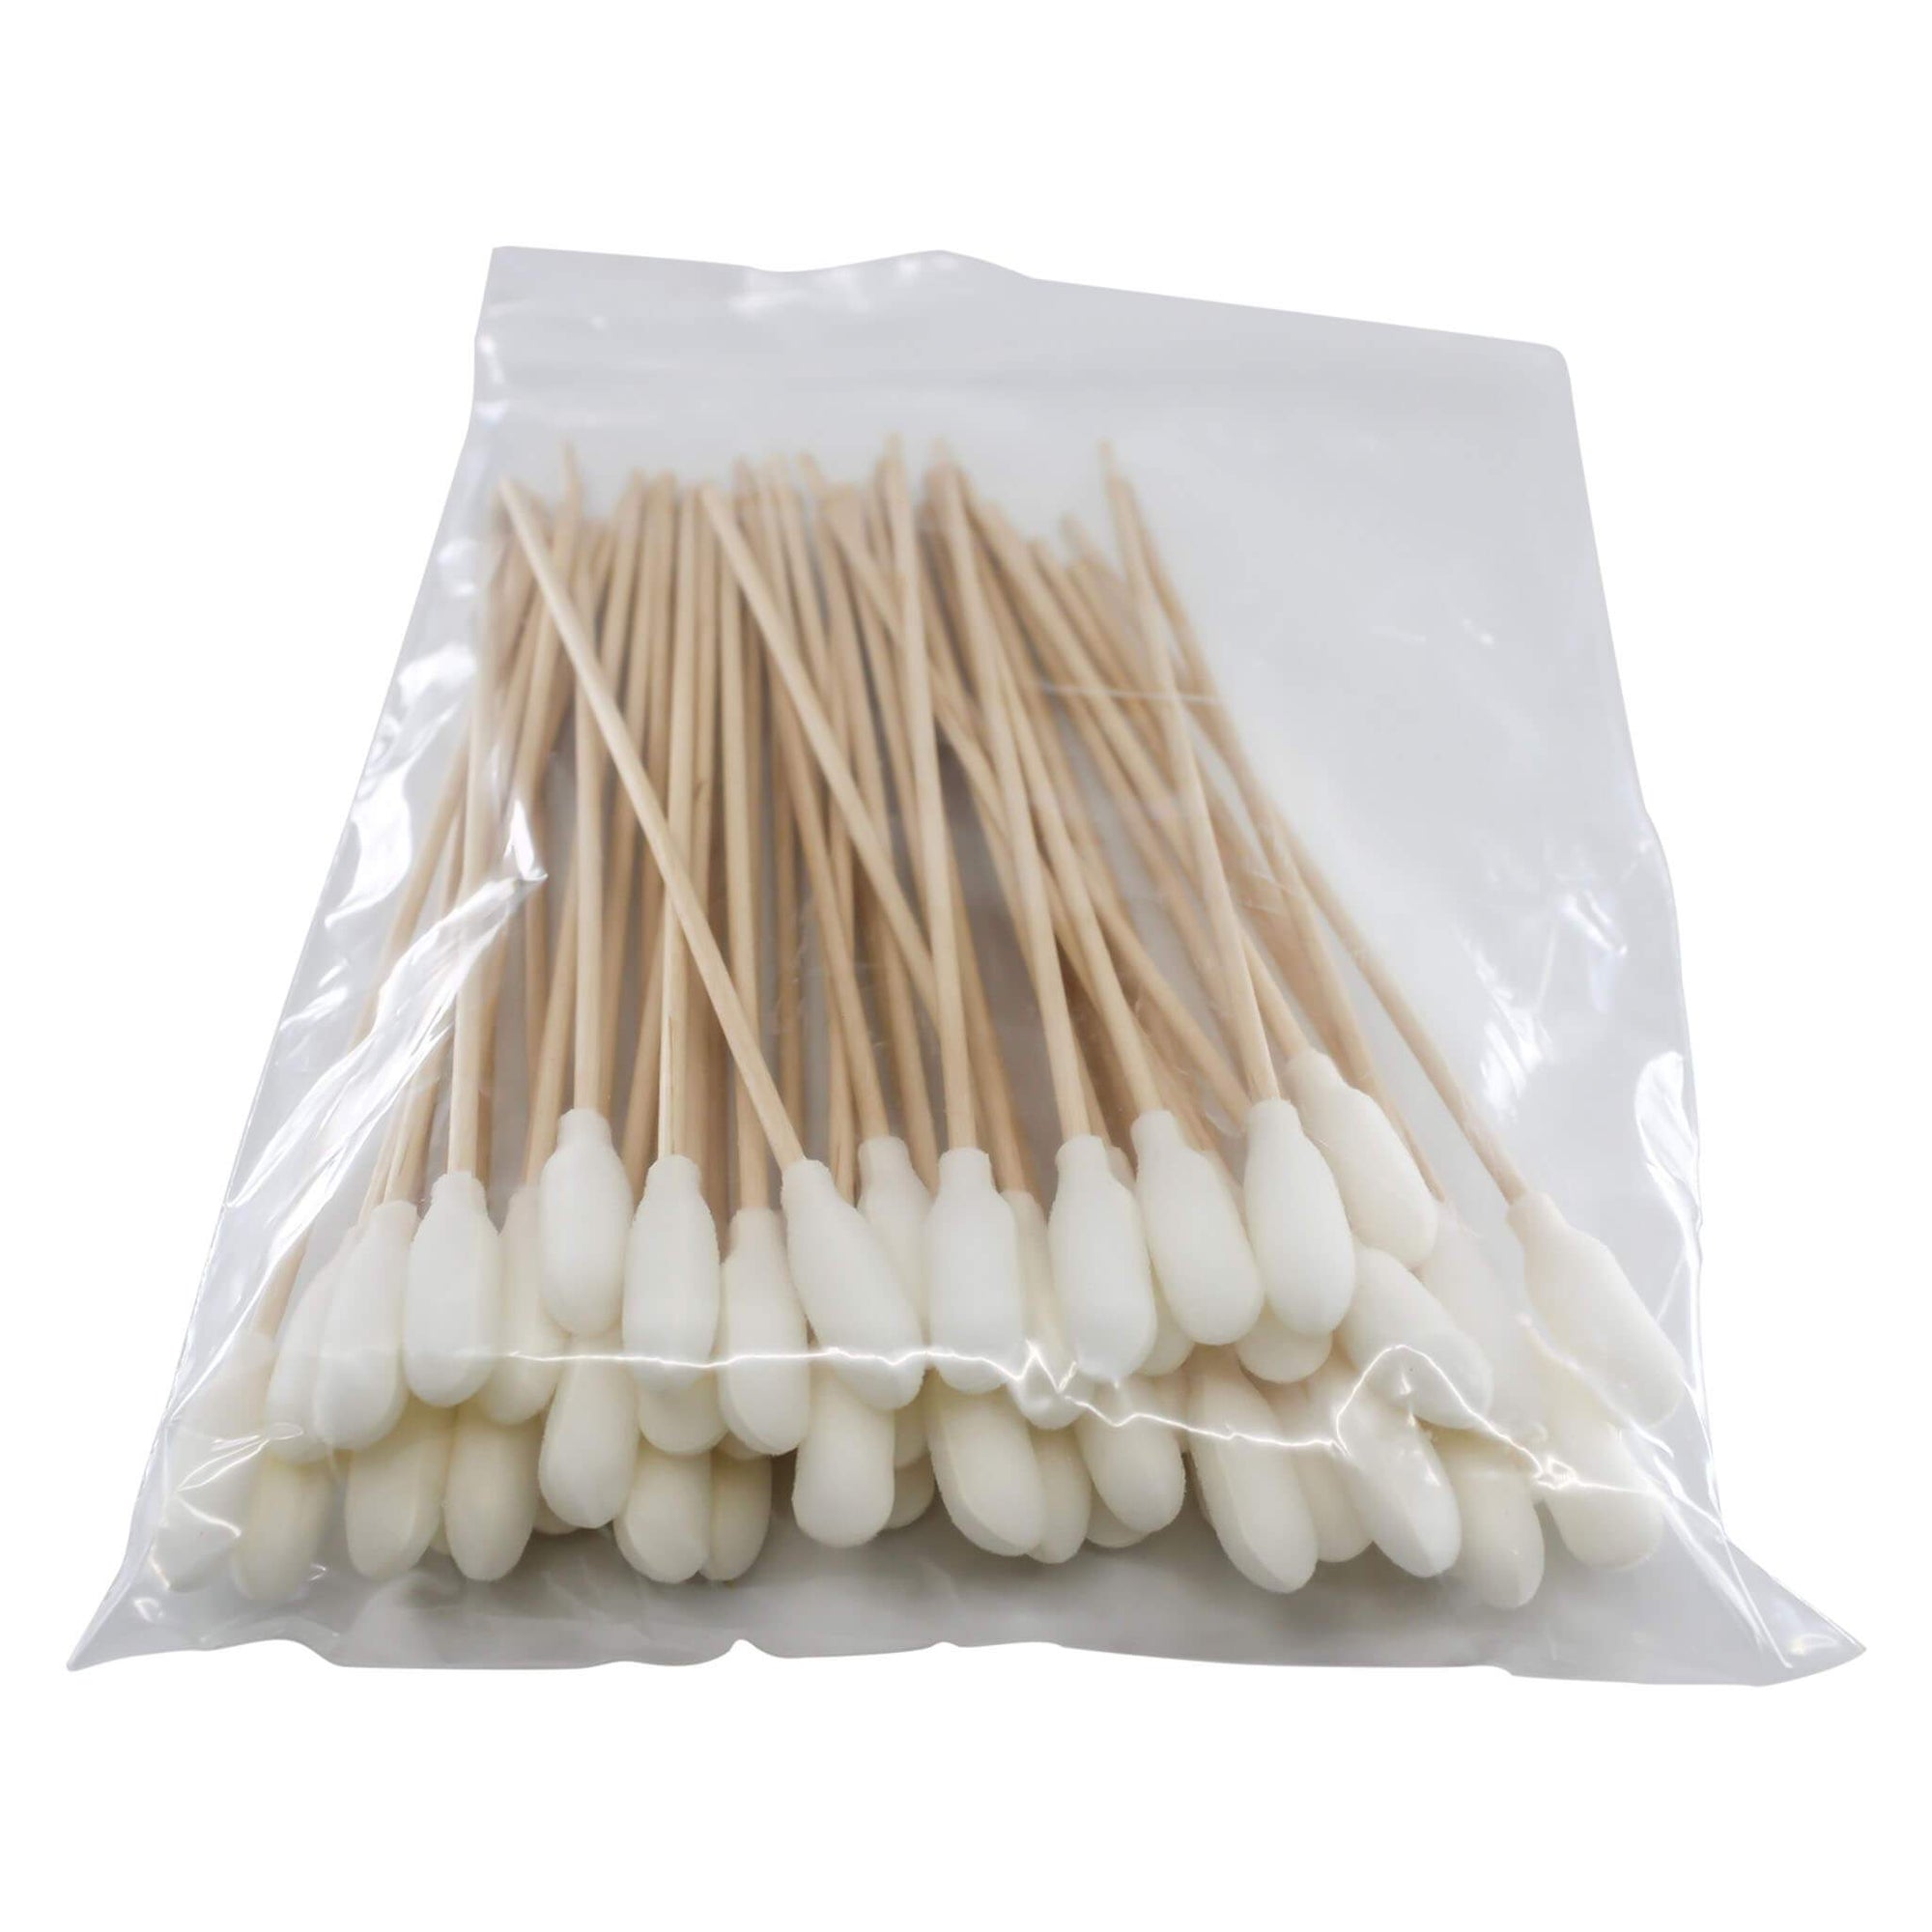 Polyurethane Foam Over Cotton Swabs | In Bag View | the dabbing specialists